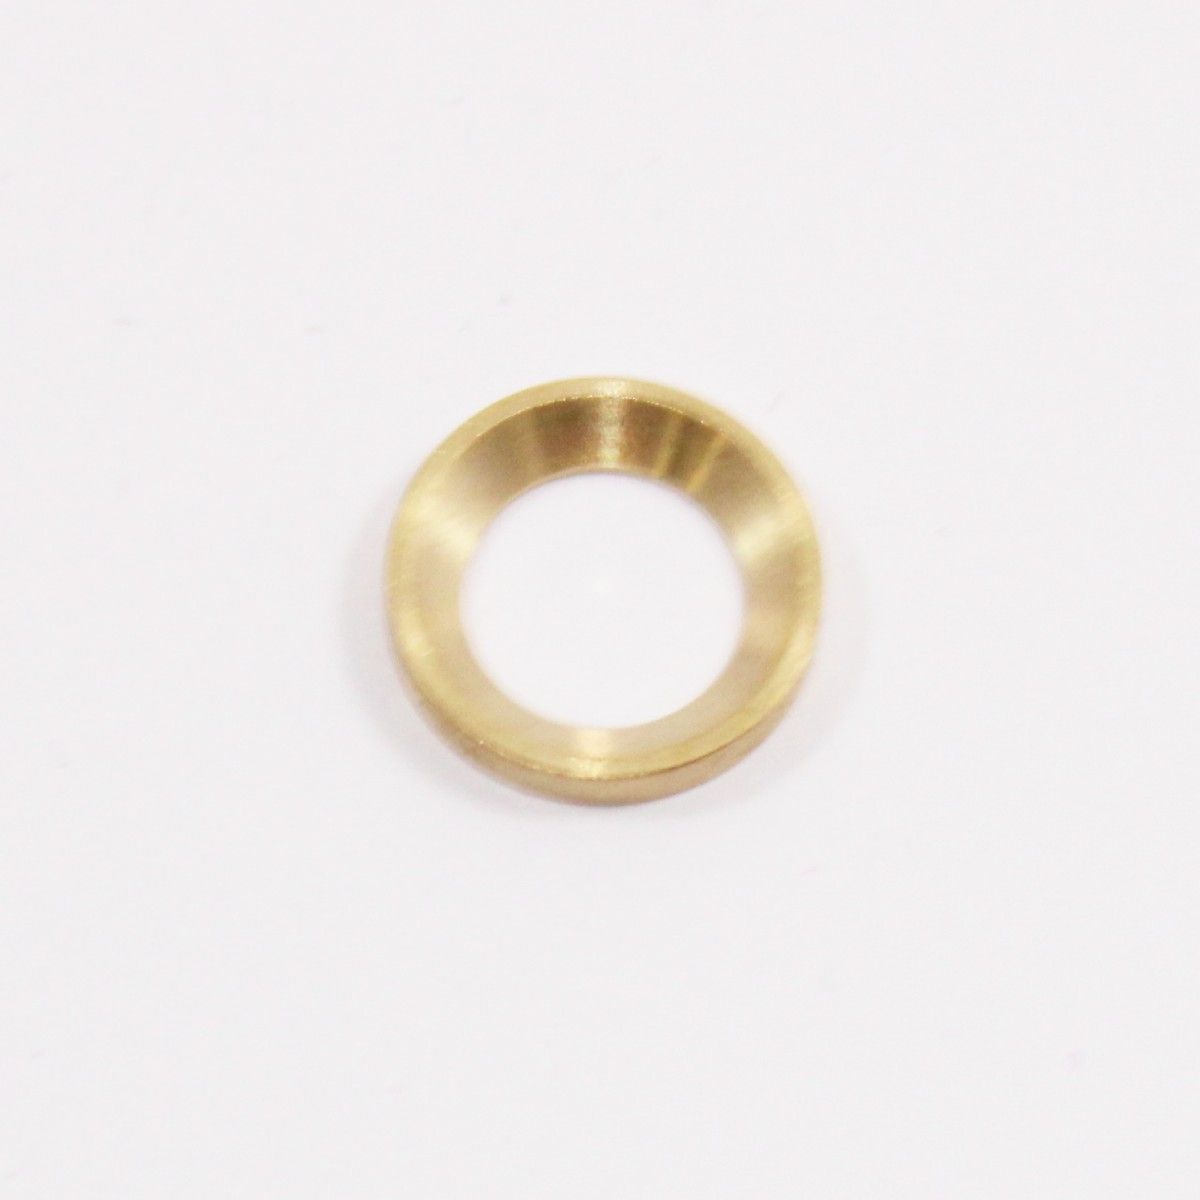 WASHER, GLAND BRASS / MGA-T, TR2->4A, AH AUC2119 102.020  náhradní díly WASHER, GLAND BRASS / MGA-T, TR2->4A, AH AUC2119